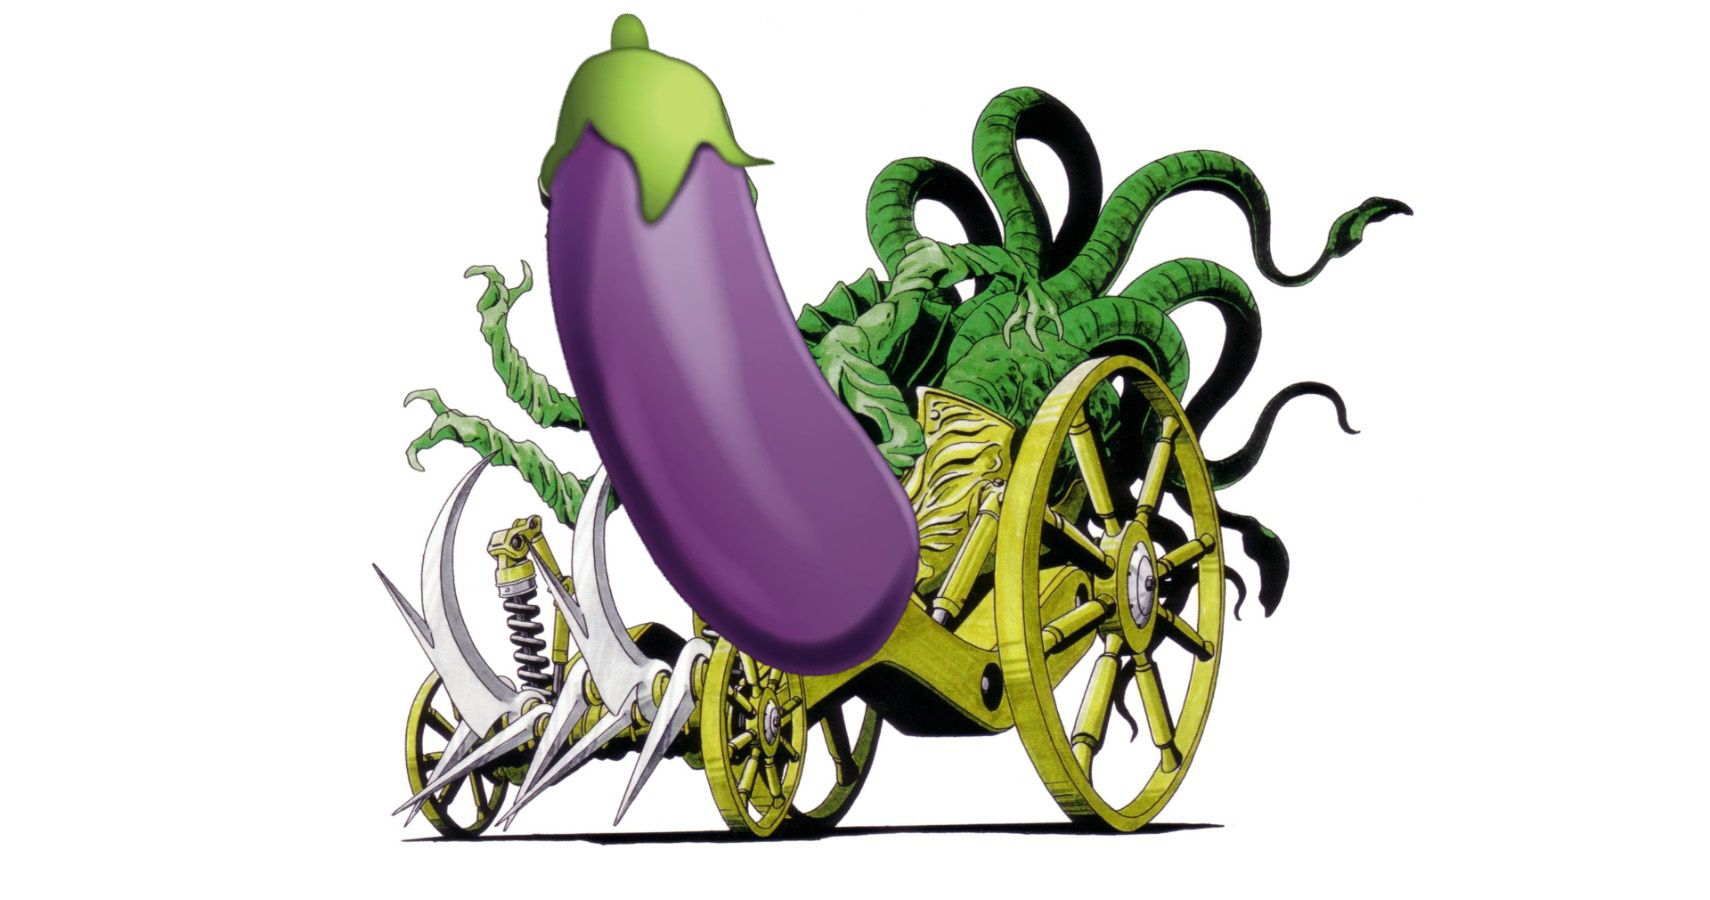 Mara The Willy Monster Is Poised To Be Voted The Best SMT Demon (Again)